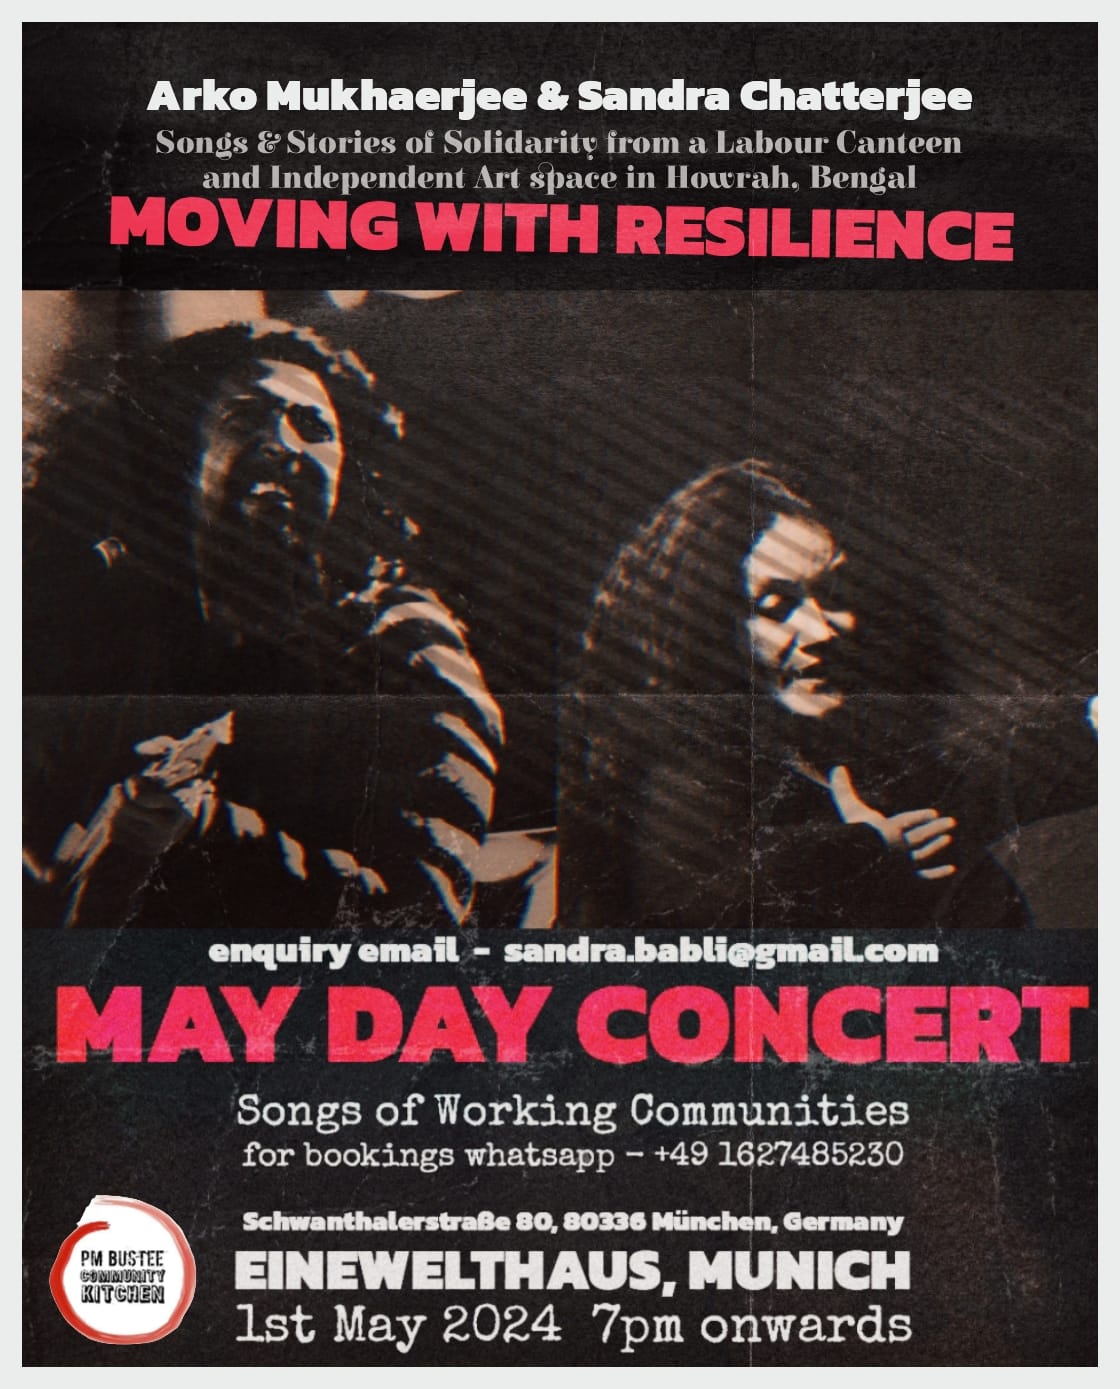 MAY DAY CONCERT – SONGS OF WORKING COMMUNITIES